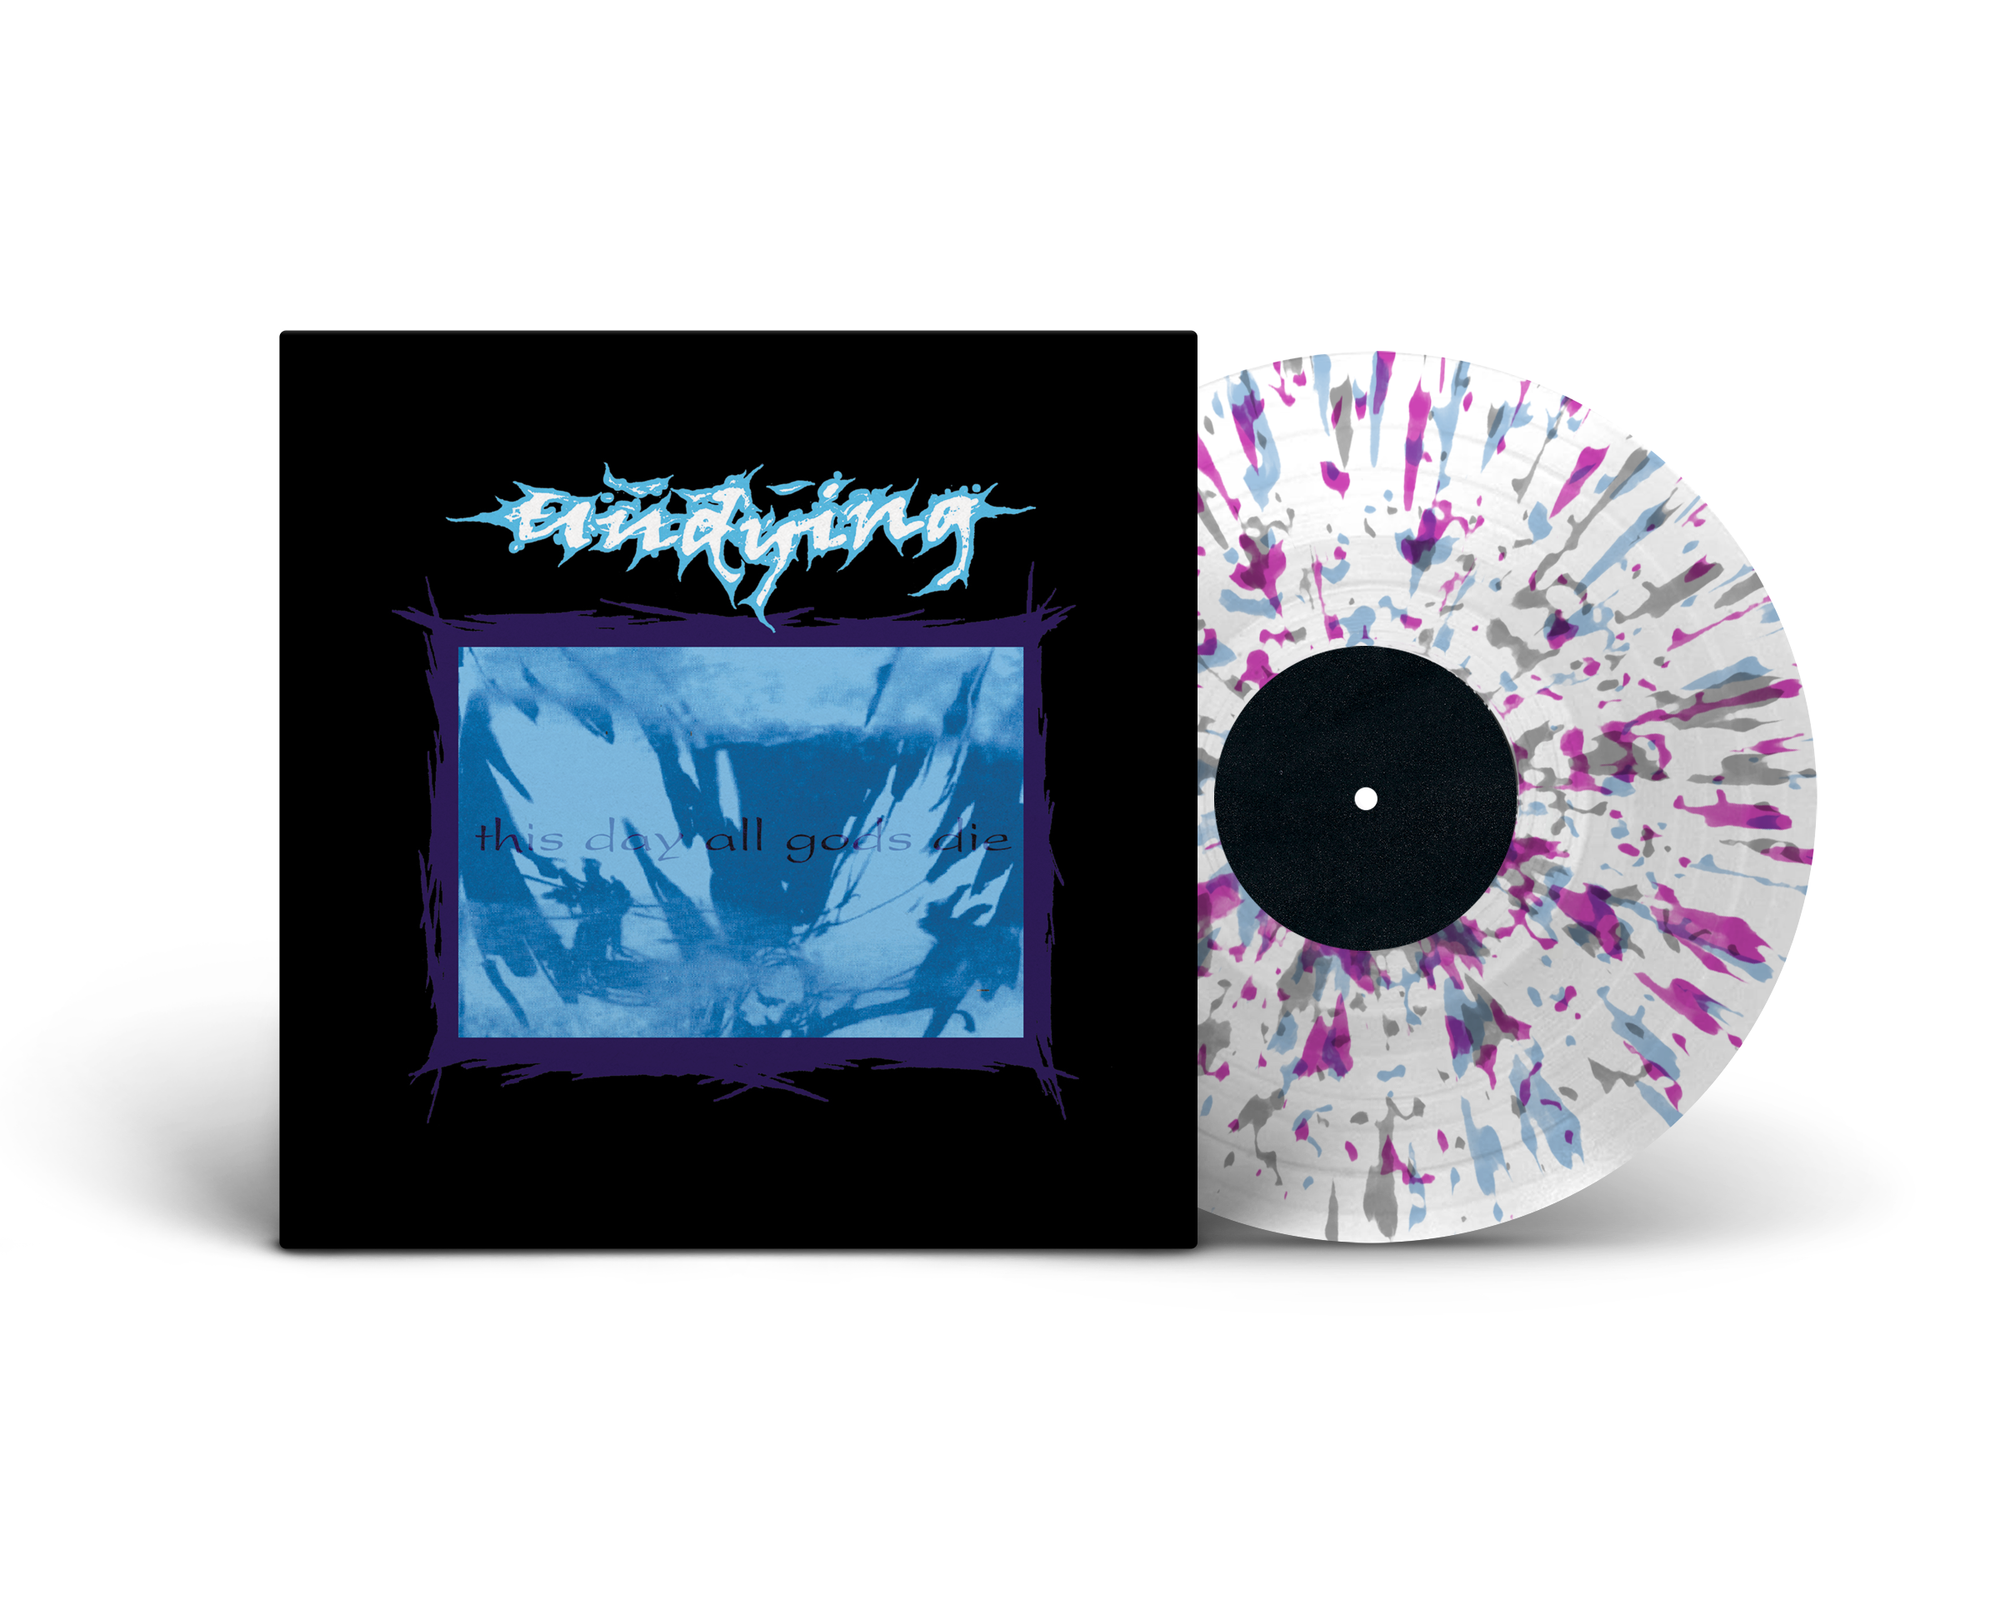 UNDYING "THIS DAY ALL GODS DIE" LP